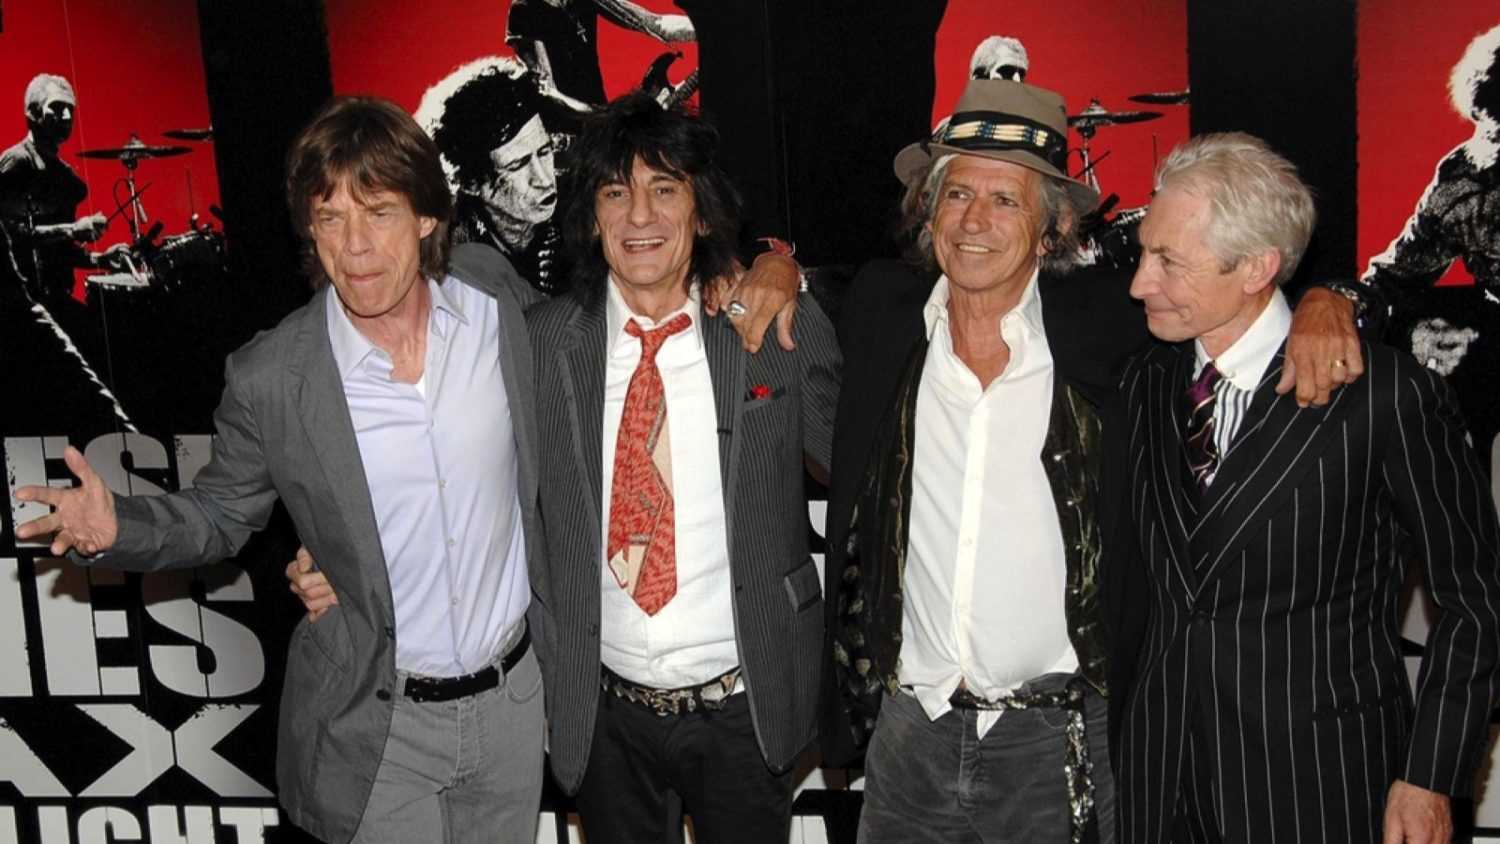 <p>The first notes build slowly and quietly into a final crescendo is what is one of The Rolling Stones’ most unforgettable tracks. The band enjoyed several suggestions on this thread, but "Gimme Shelter" won, with one person describing it as a memorable "moment in music history."</p>